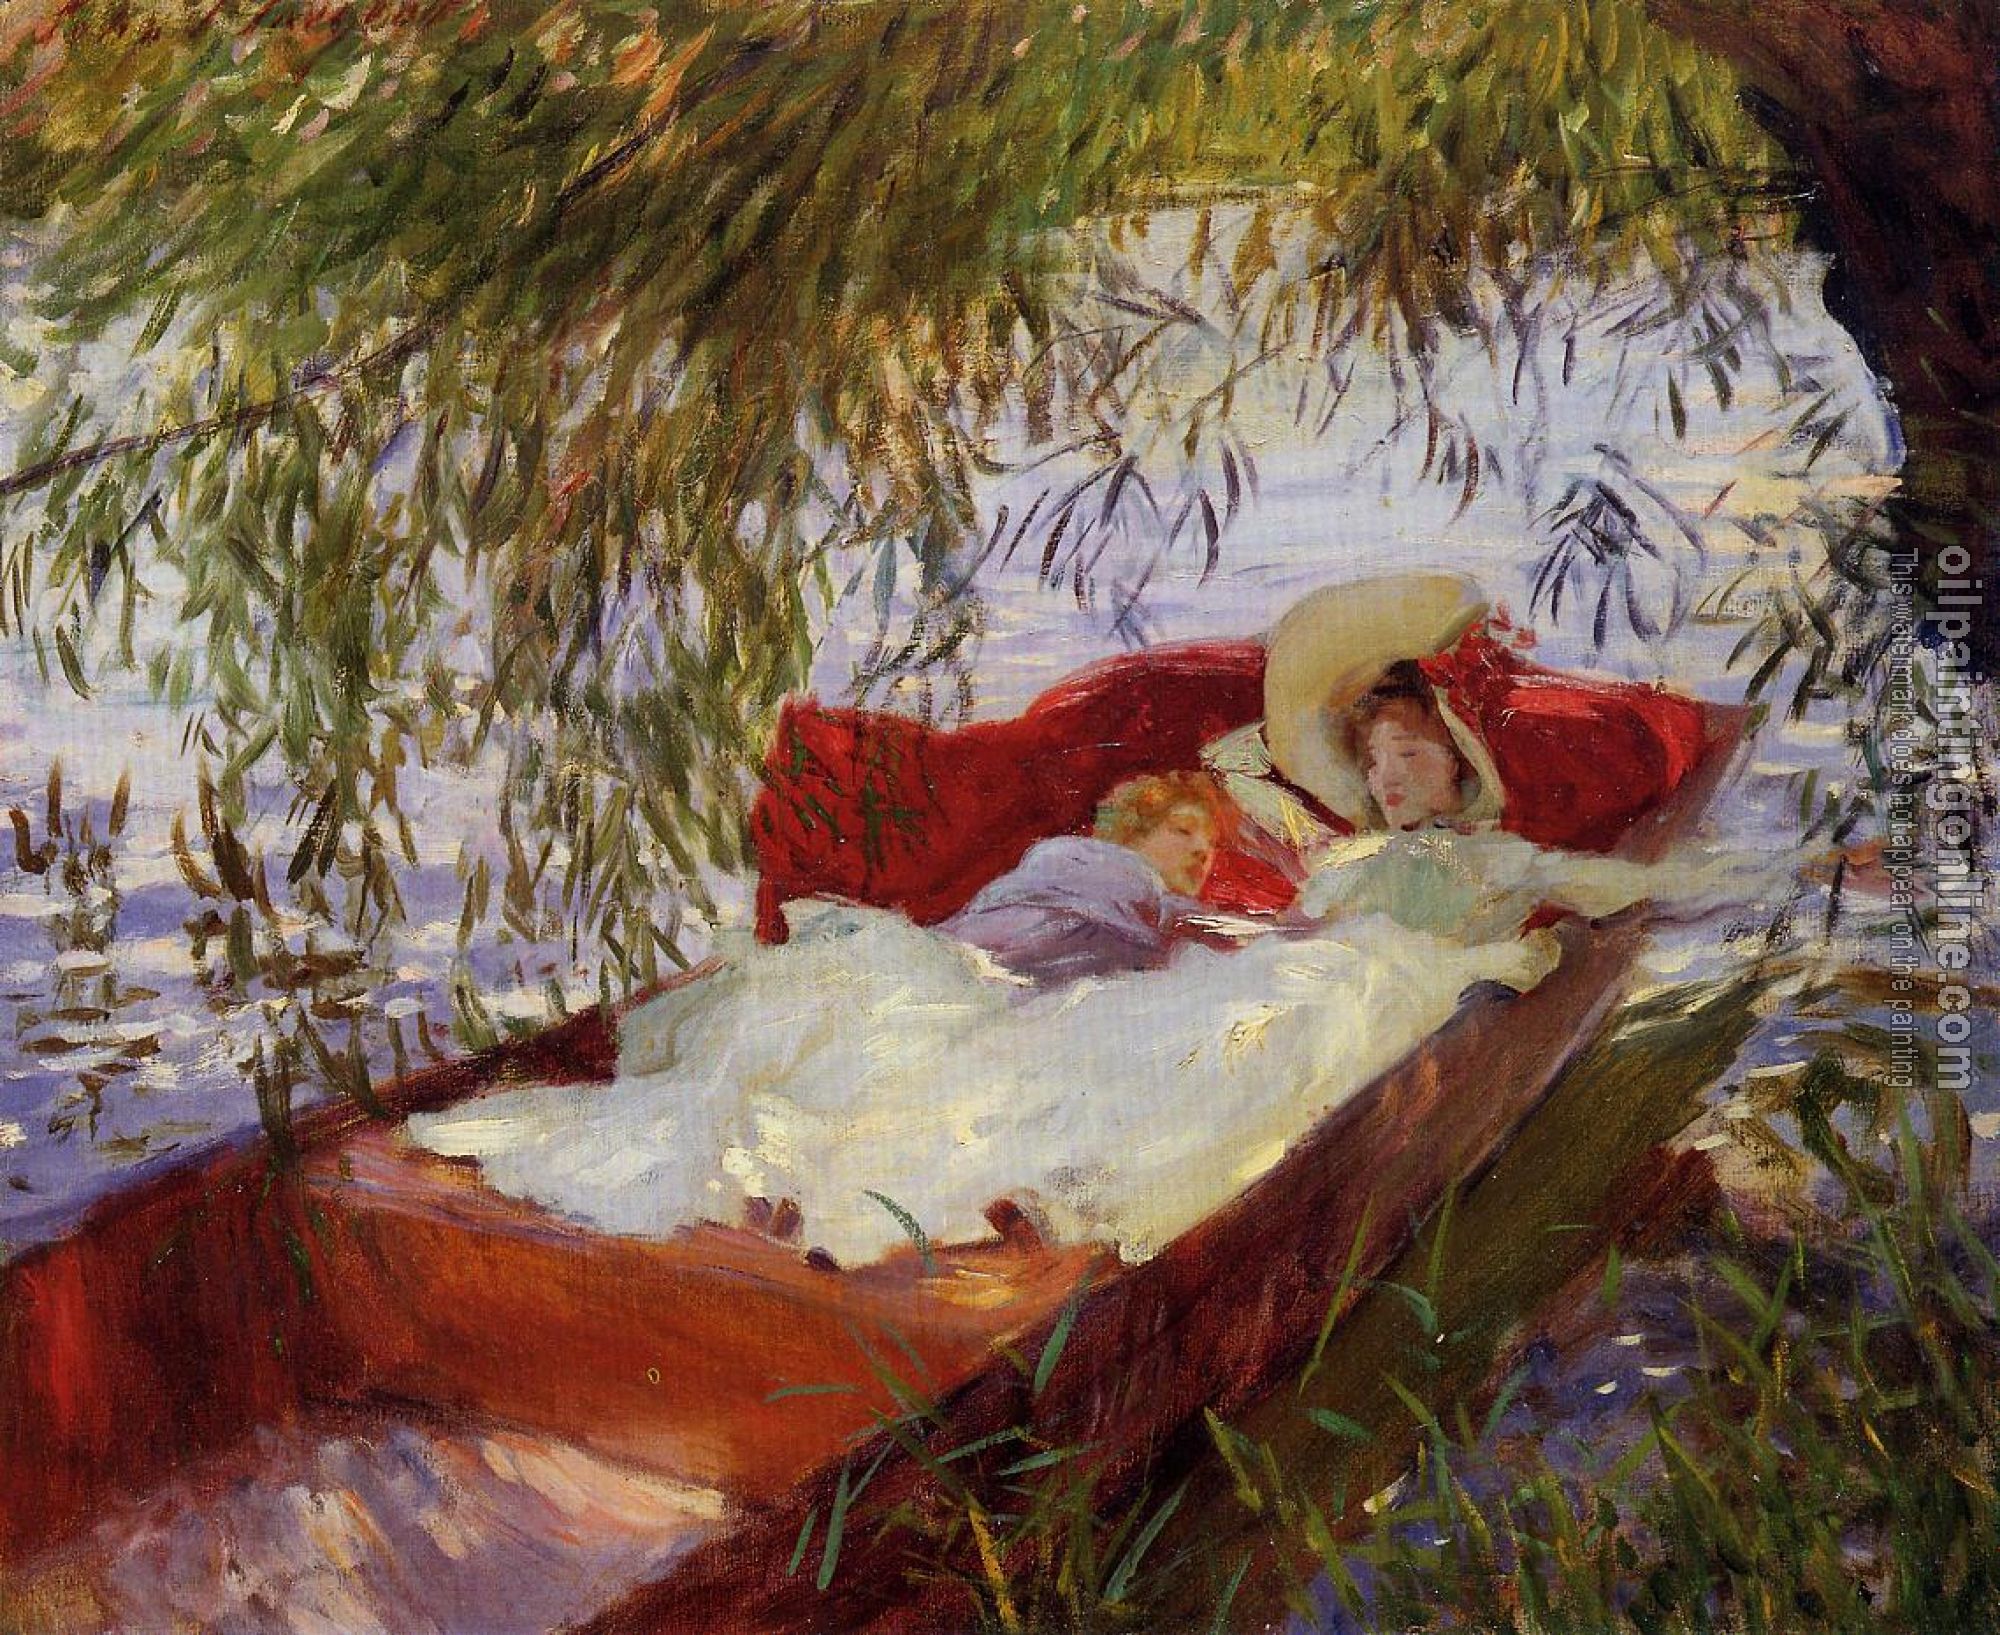 Sargent, John Singer - Two Women Asleep in a Punt under the Willows